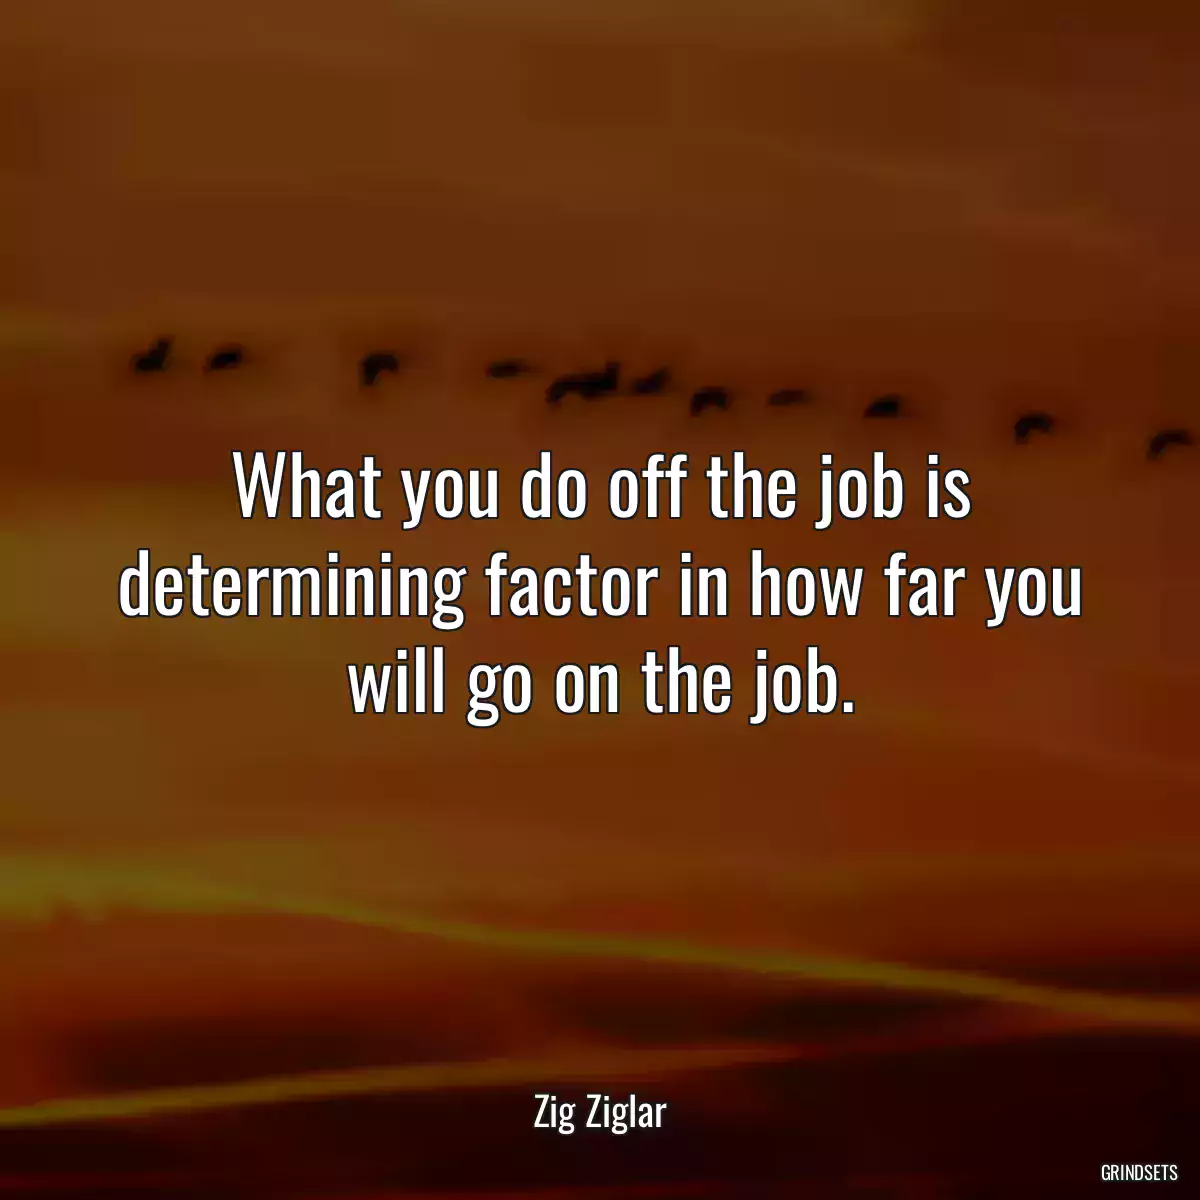 What you do off the job is determining factor in how far you will go on the job.